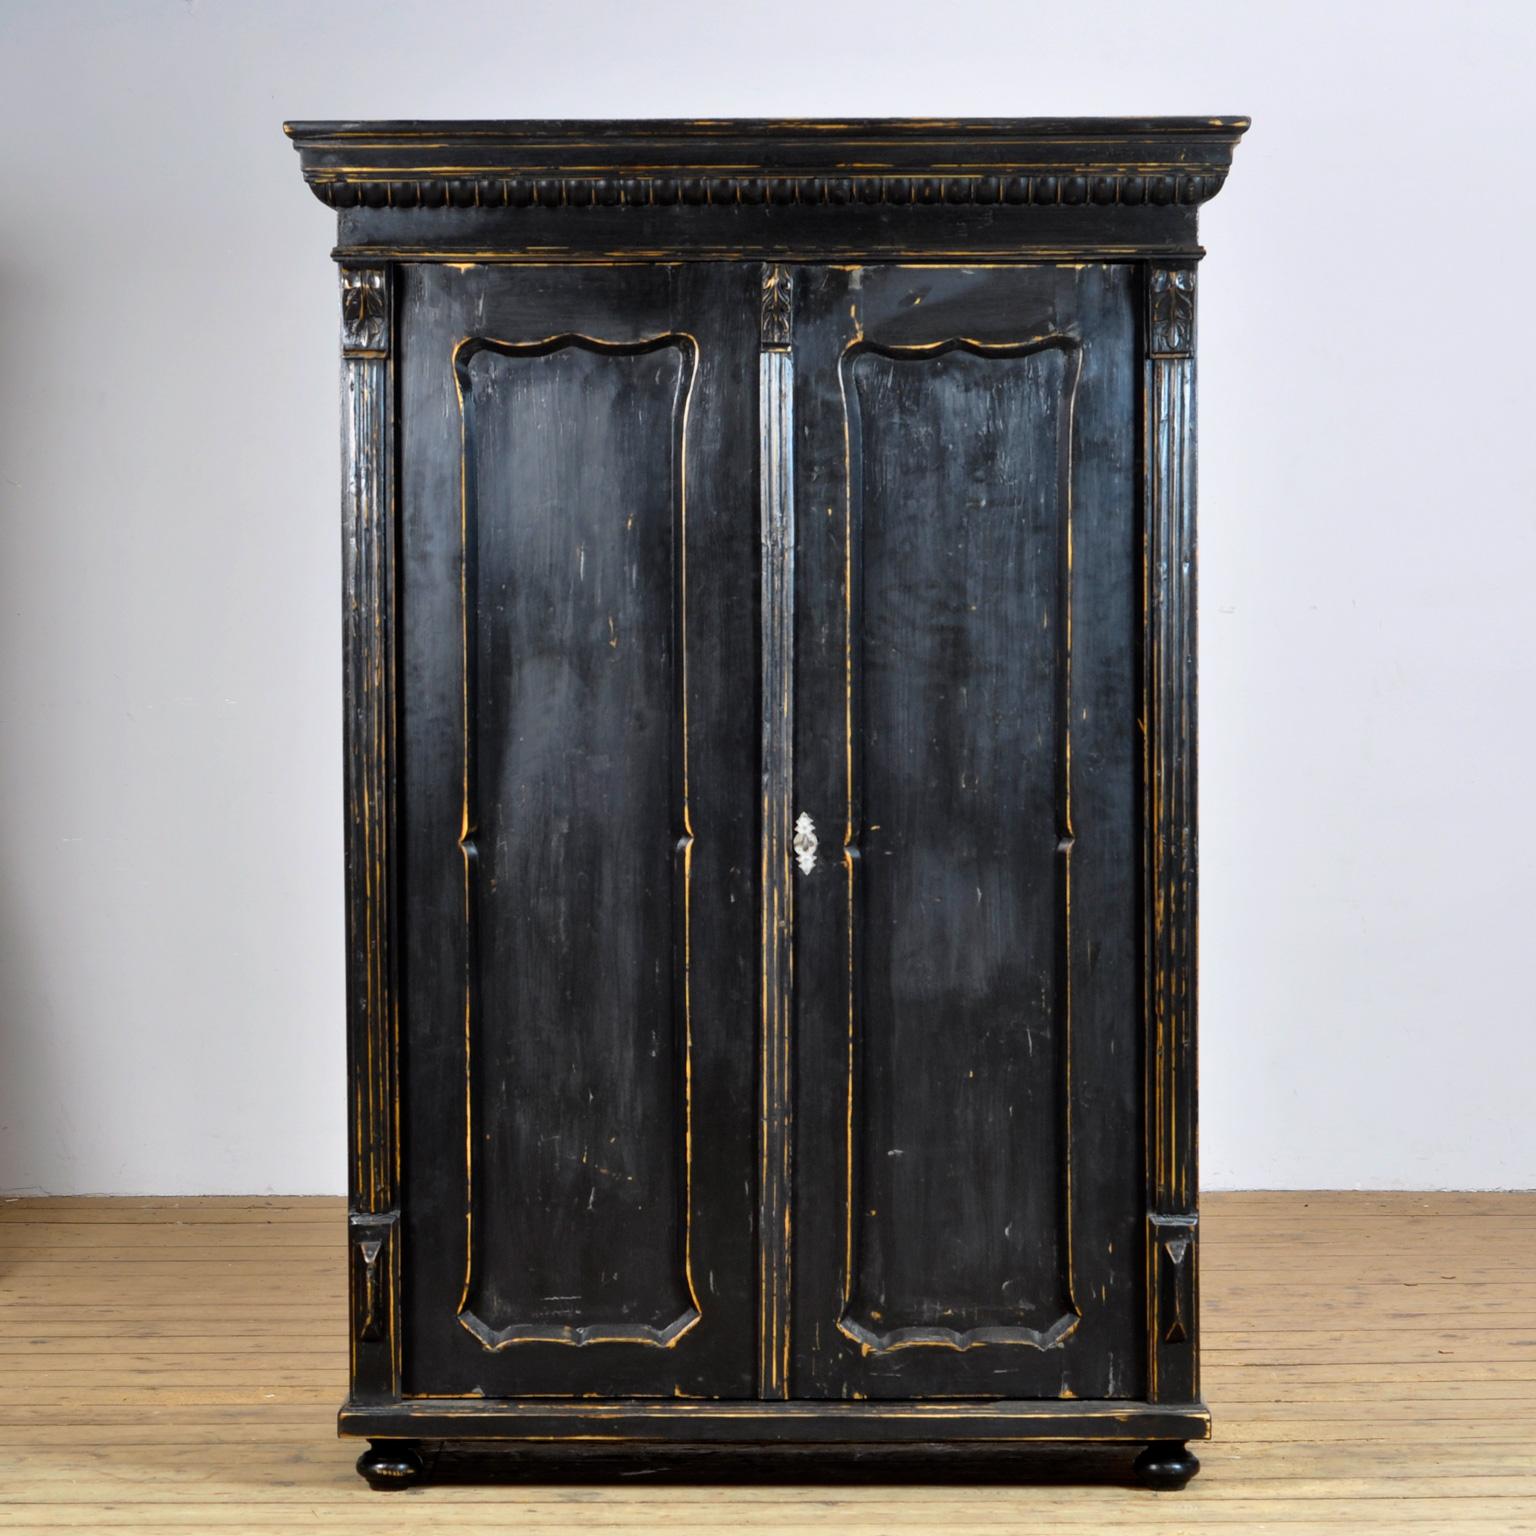 This brocante cabinet comes from France circa 1920. The cabinet is made of pine wood and has its origanal paint. The cabinet has three shelves and a bar to hang clothes. (The shelves can be taken out) . With well-functioning lock/key.